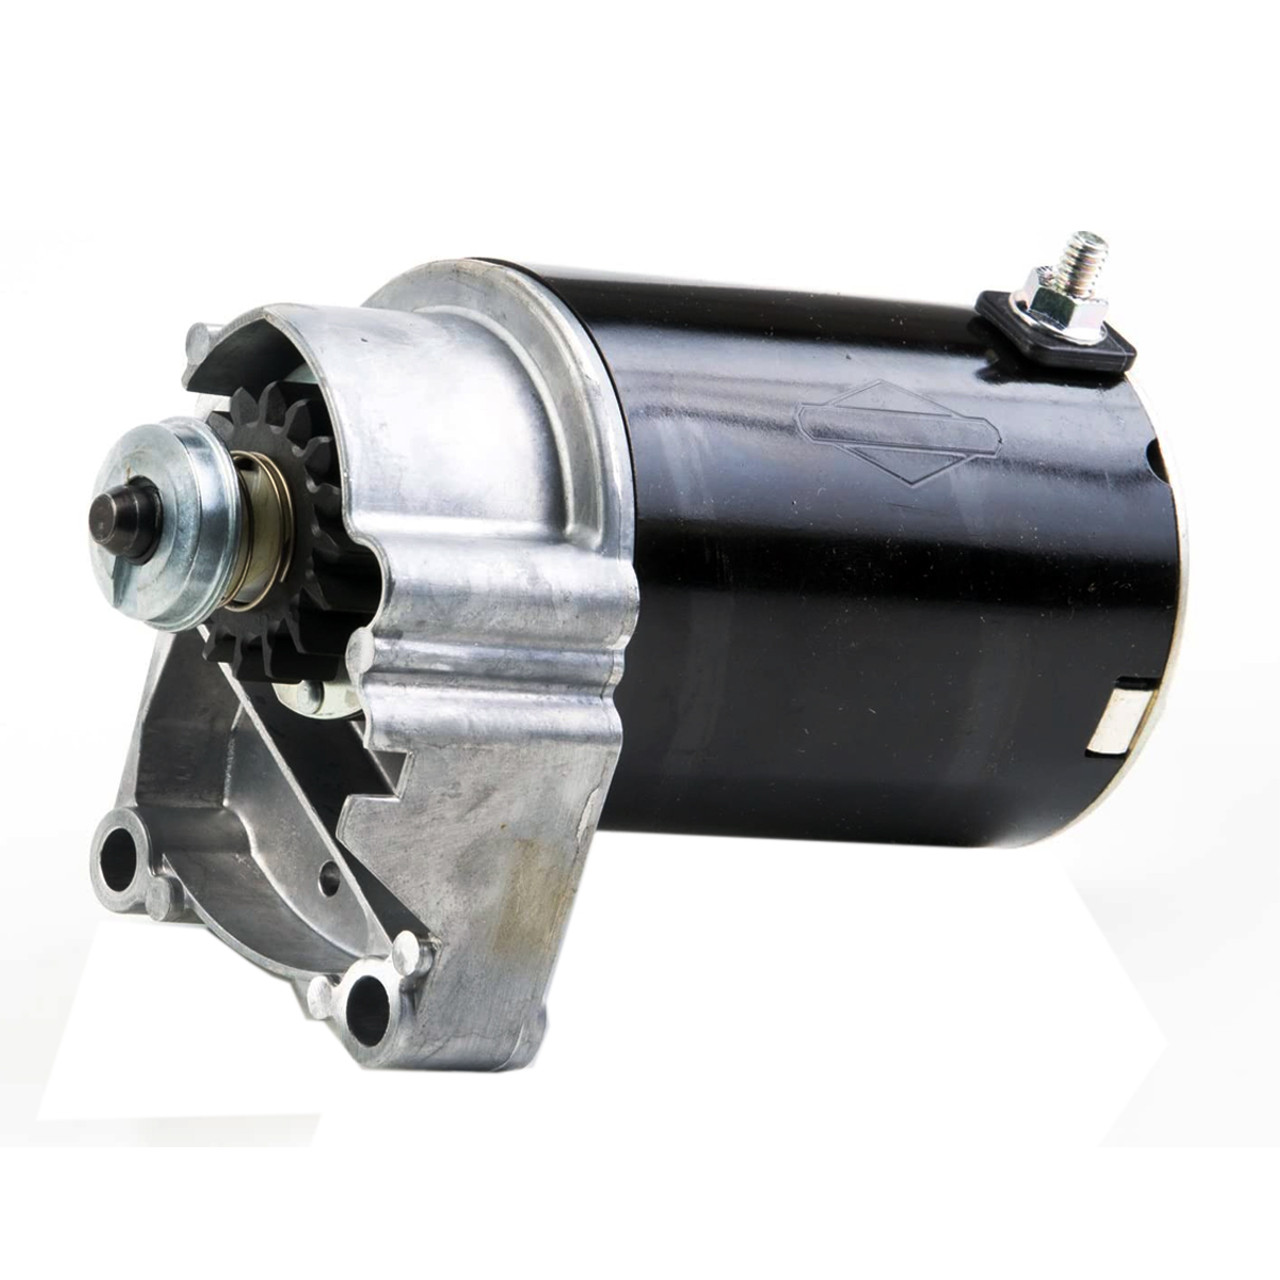 https://cdn11.bigcommerce.com/s-ml9pqxw6/images/stencil/1280x1280/products/69885/136052/16-HP-Briggs-and-Stratton-Starter-497596-OEM-1-NWM__67008.1675180784.jpg?c=2